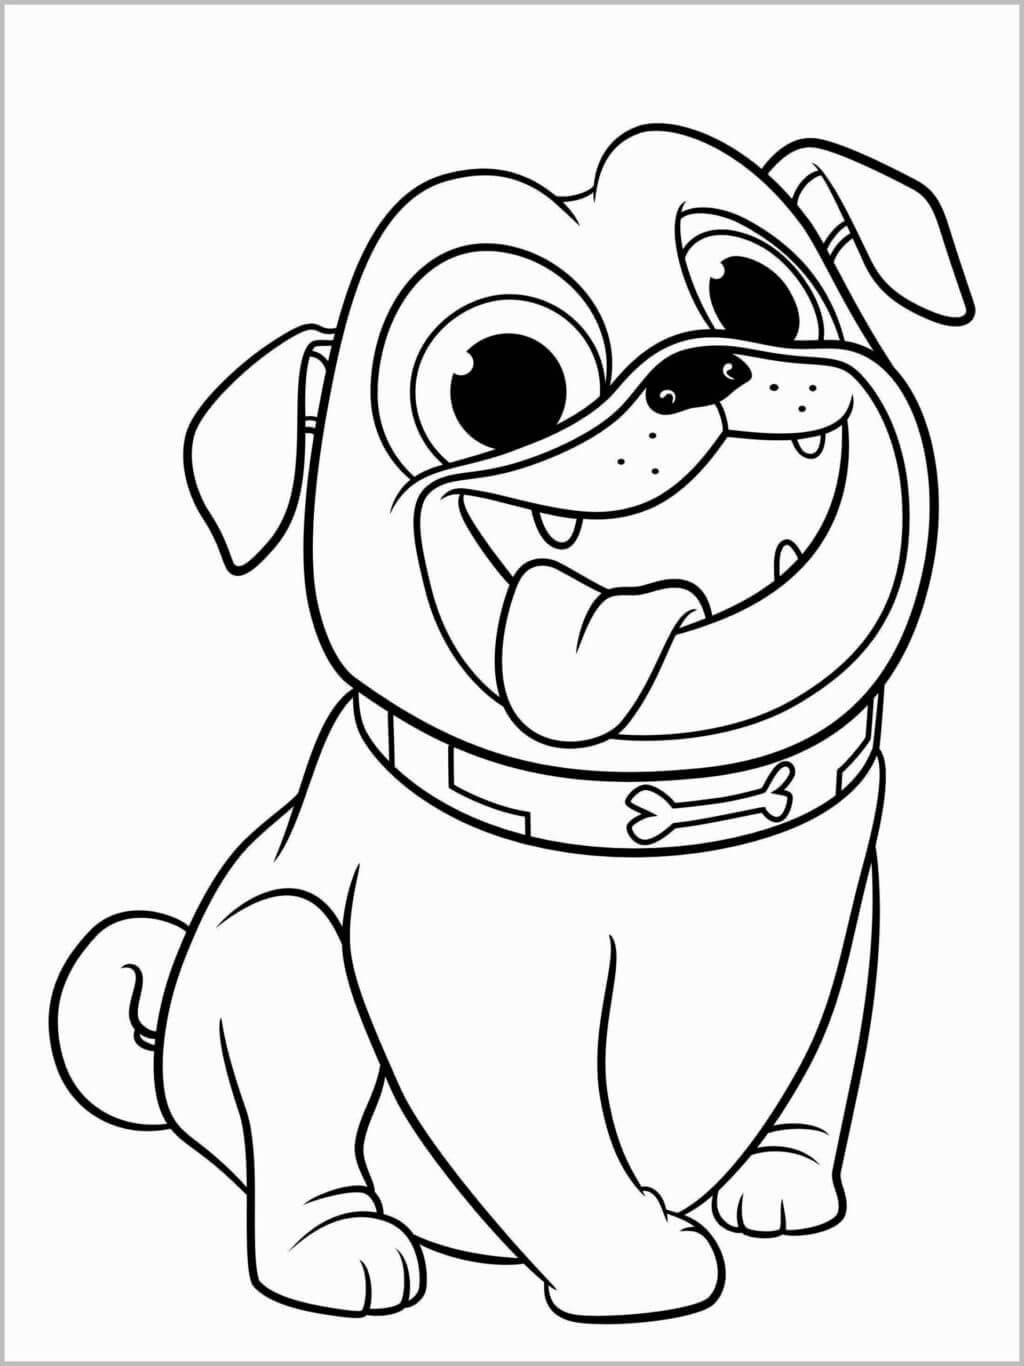 puppy-dog-pals-coloring-pages-visual-arts-ideas